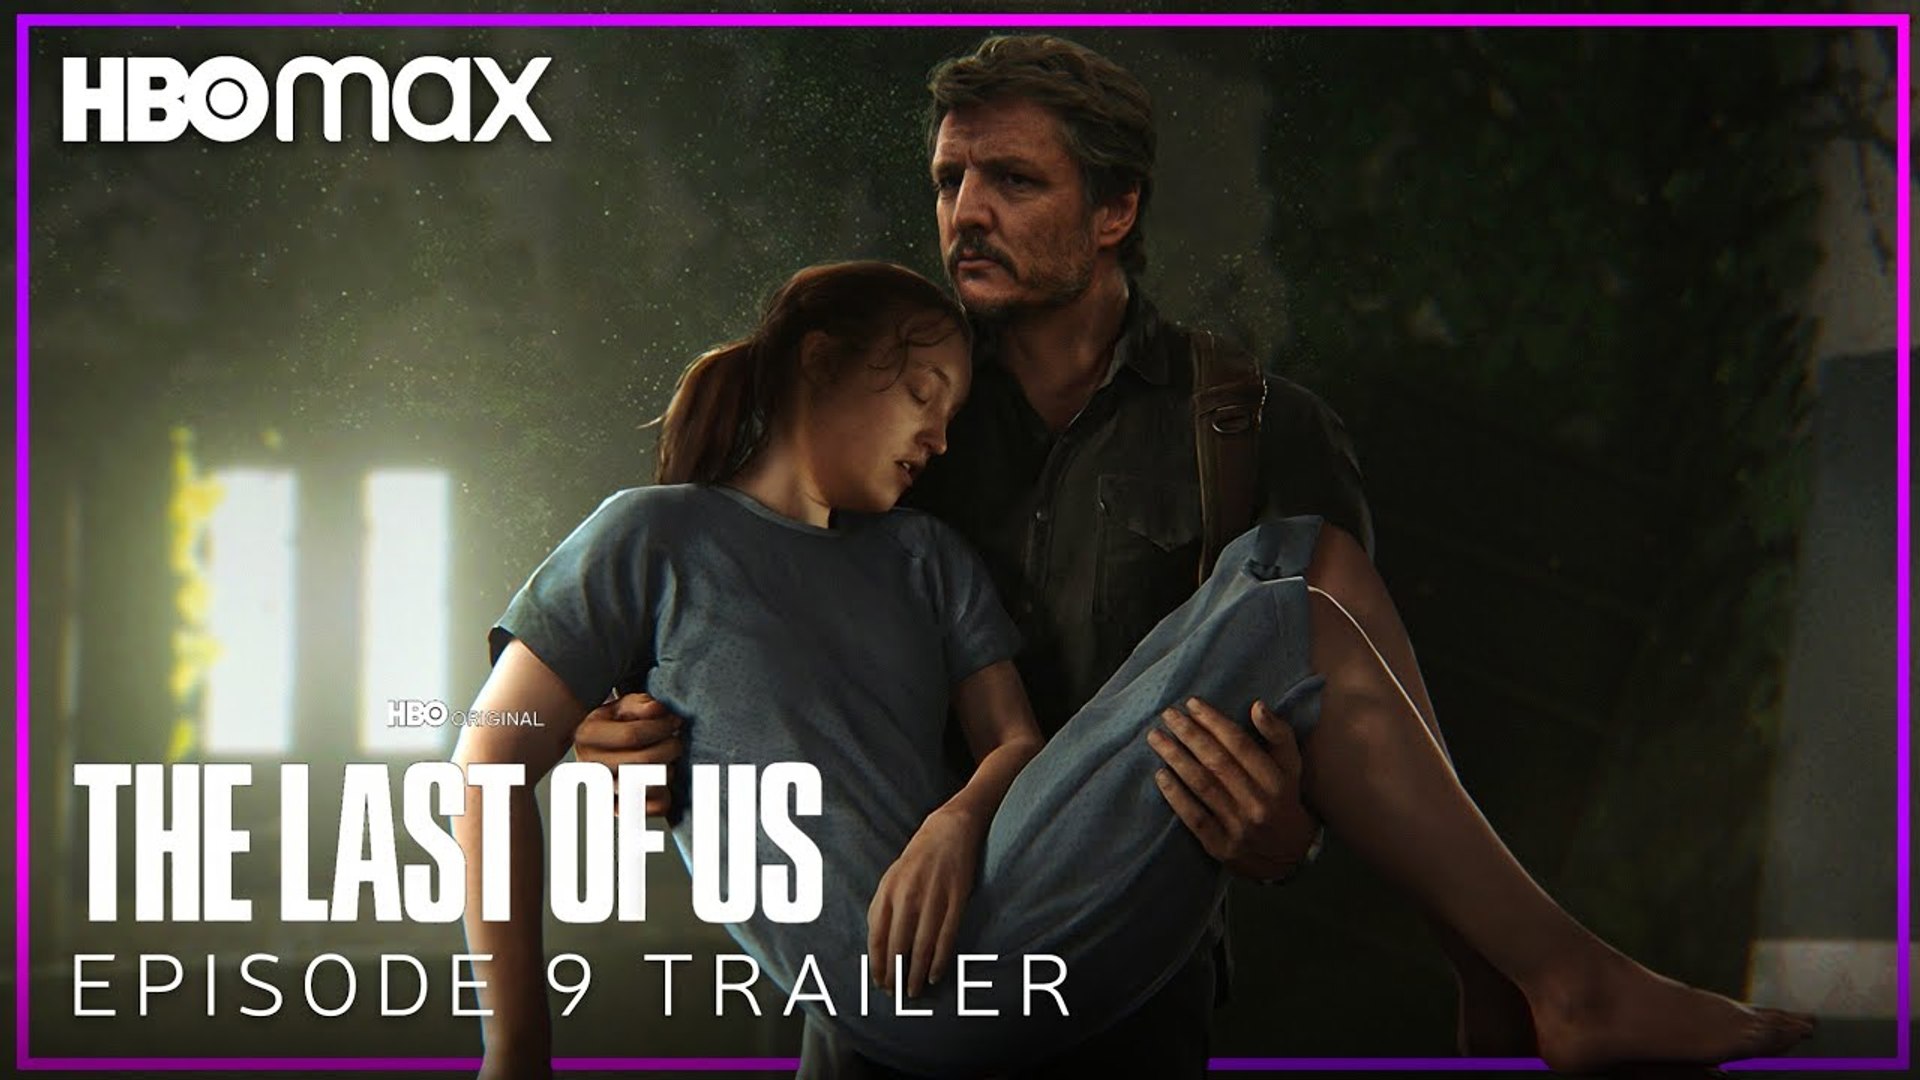 The Last of Us, EPISODE 5 TRAILER